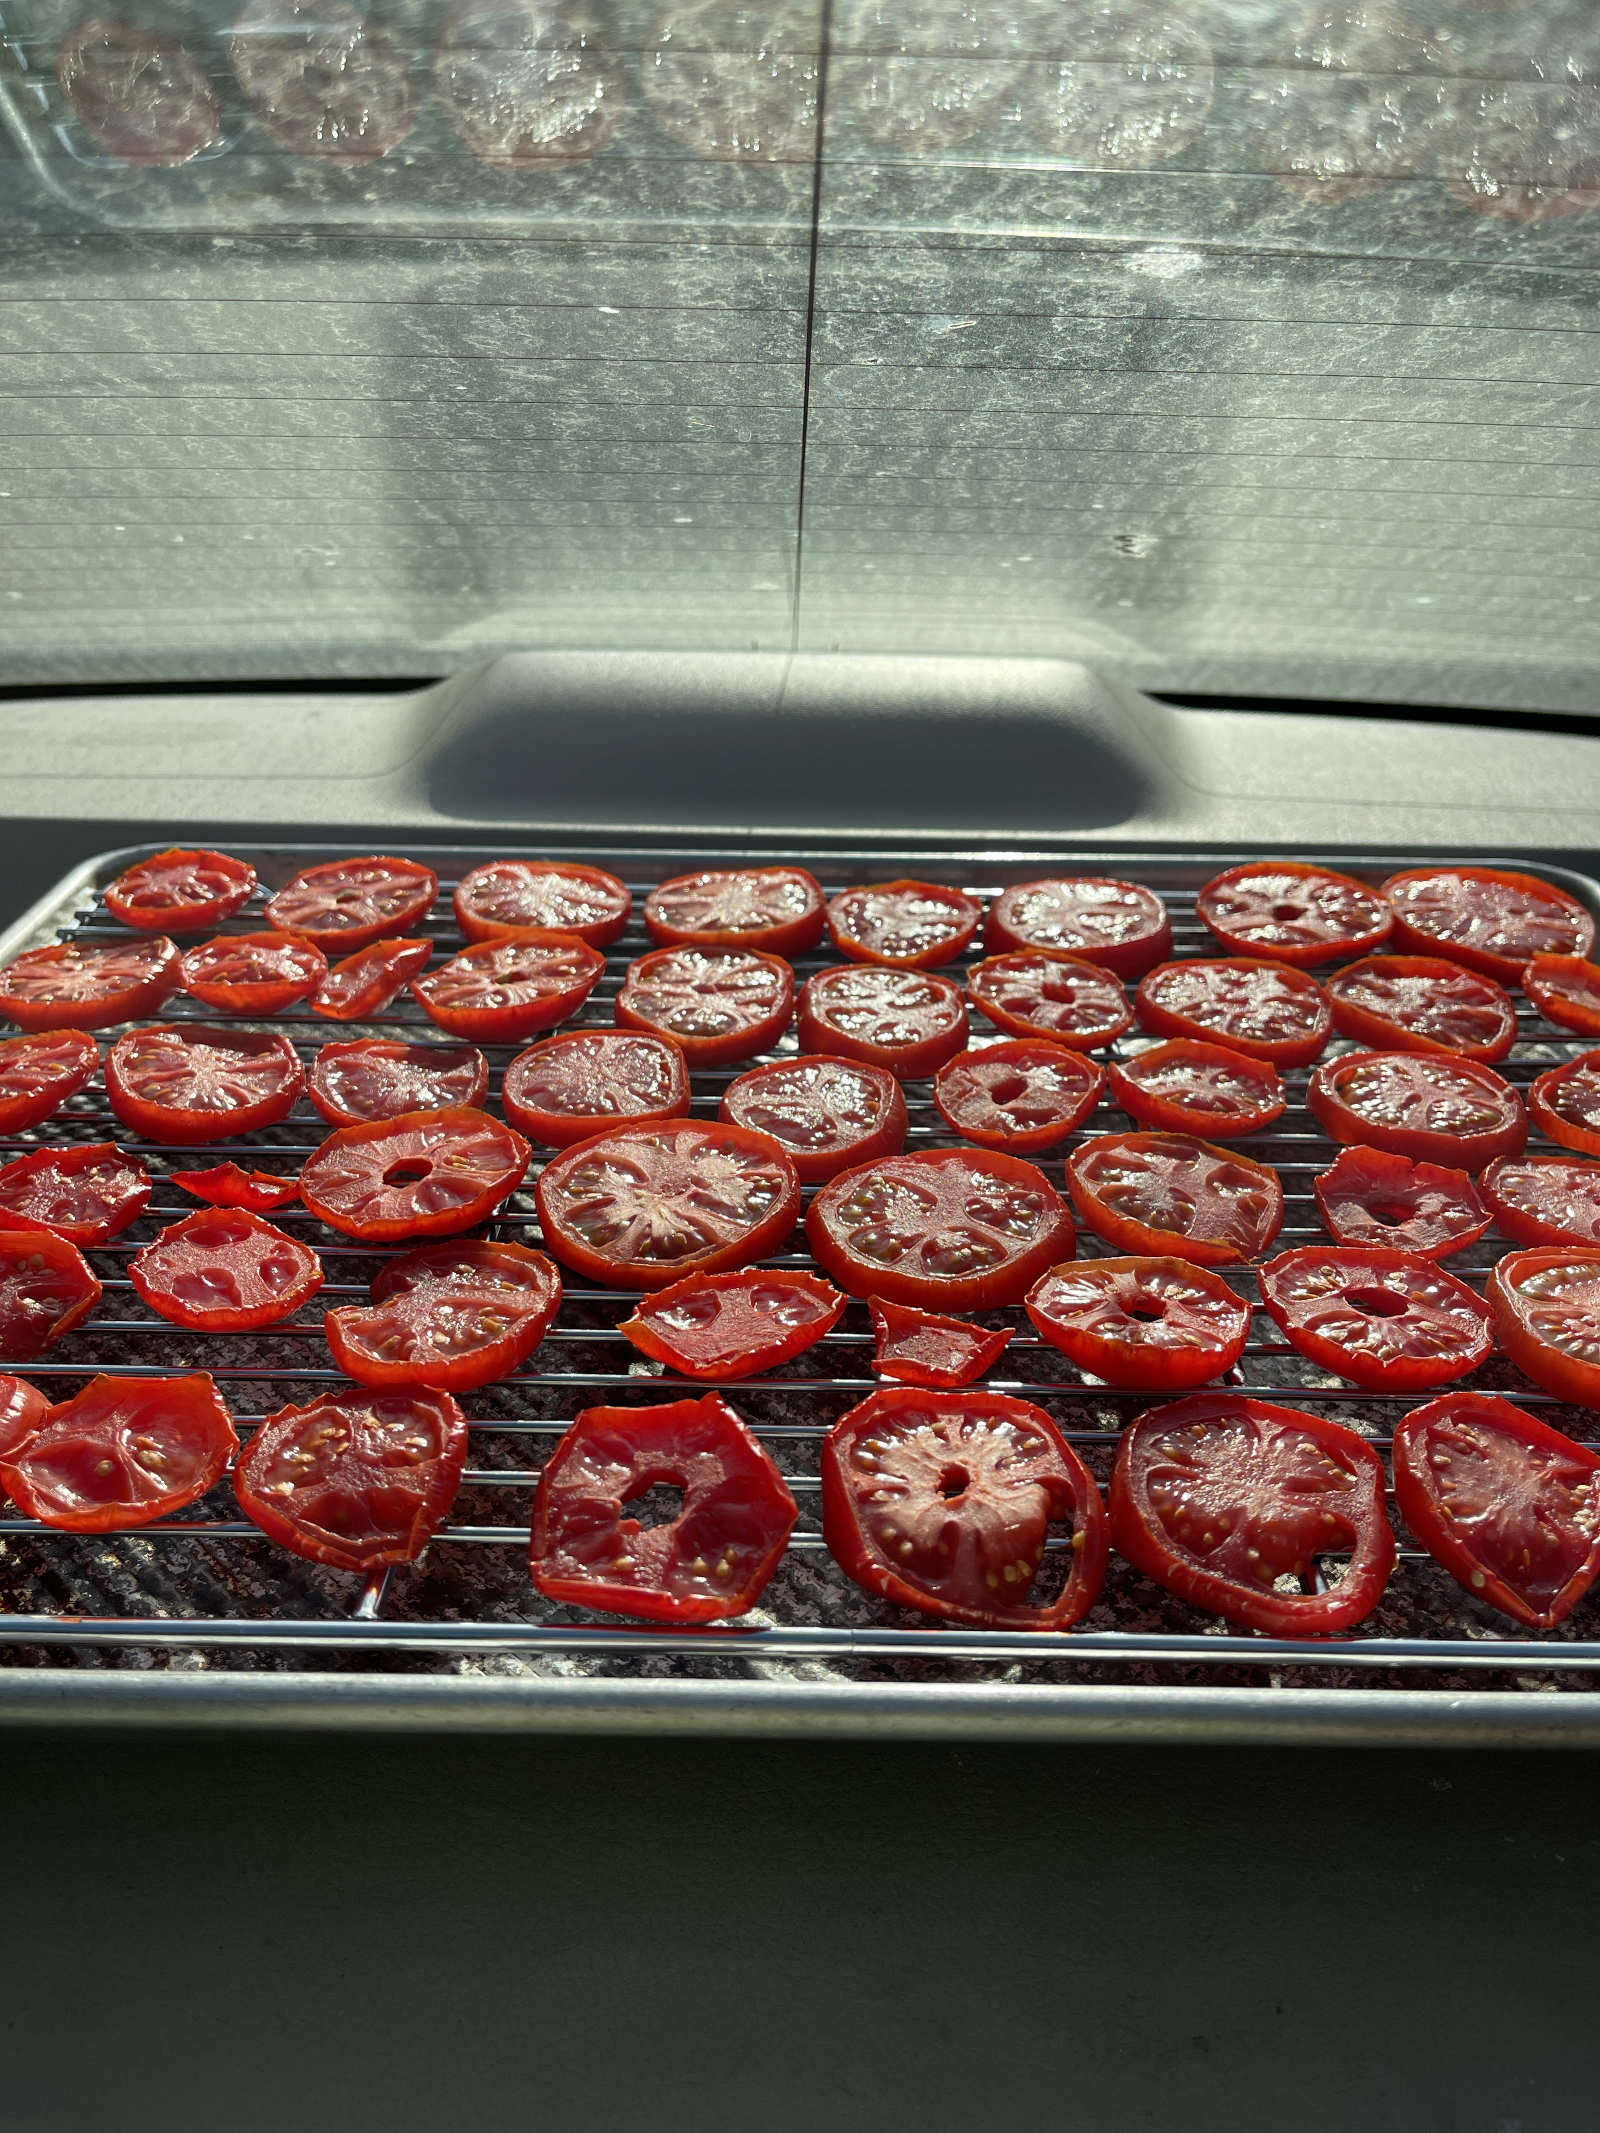 Fresh tomato slices dehydrating under the rear windshield of a car on a hot day. The tomatoes are spread across a rack set in a baking sheet.